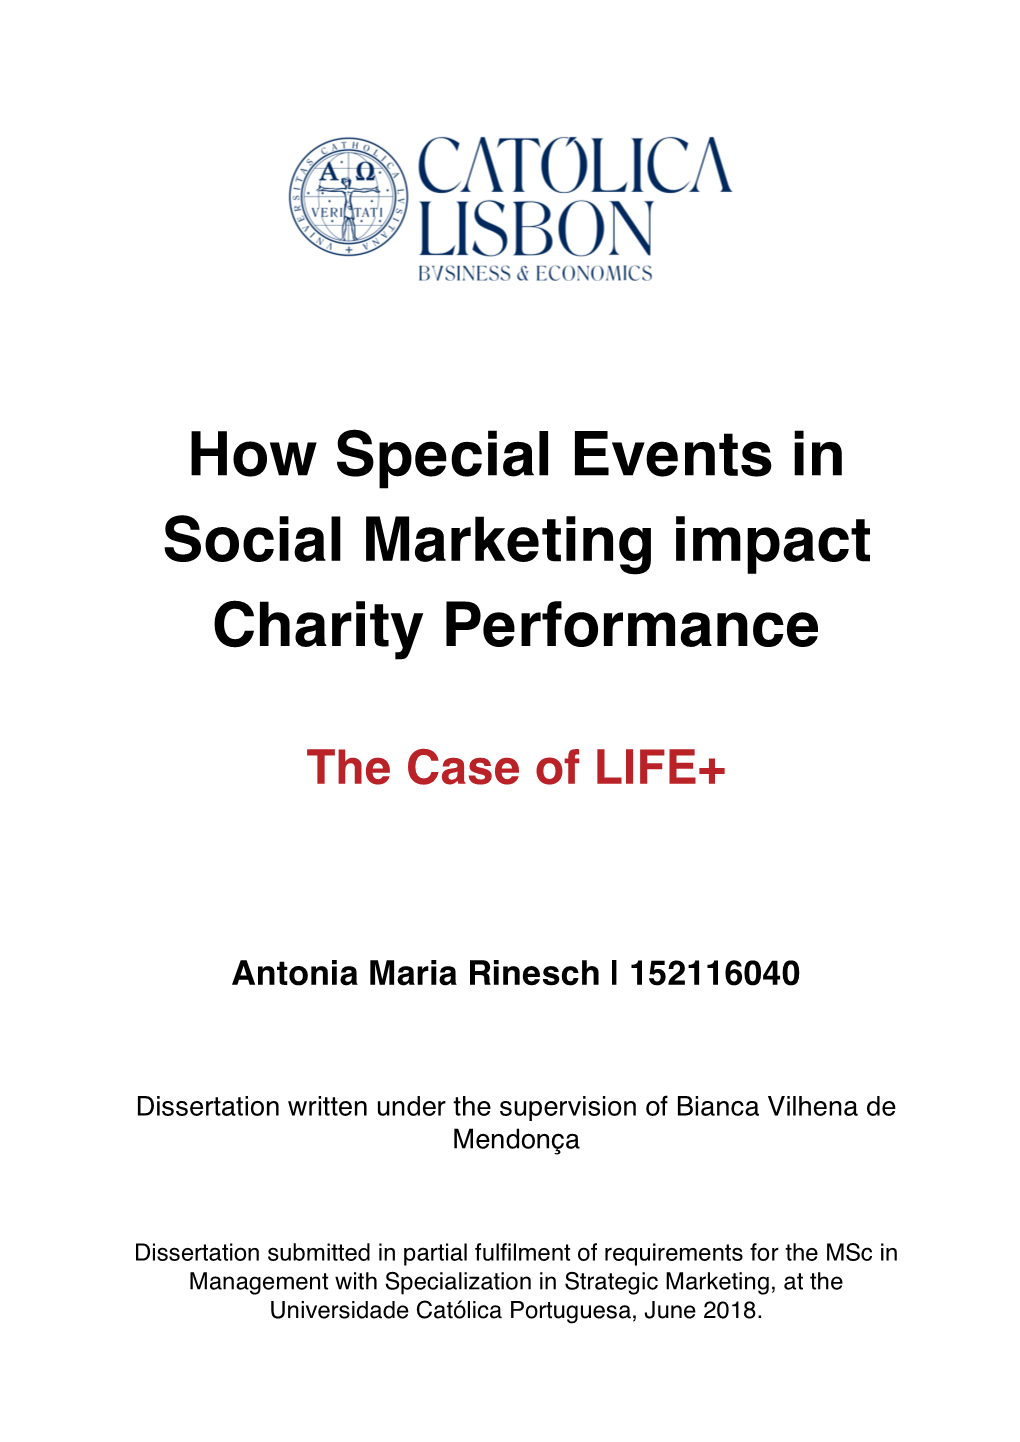 How Special Events in Social Marketing Impact Charity Performance